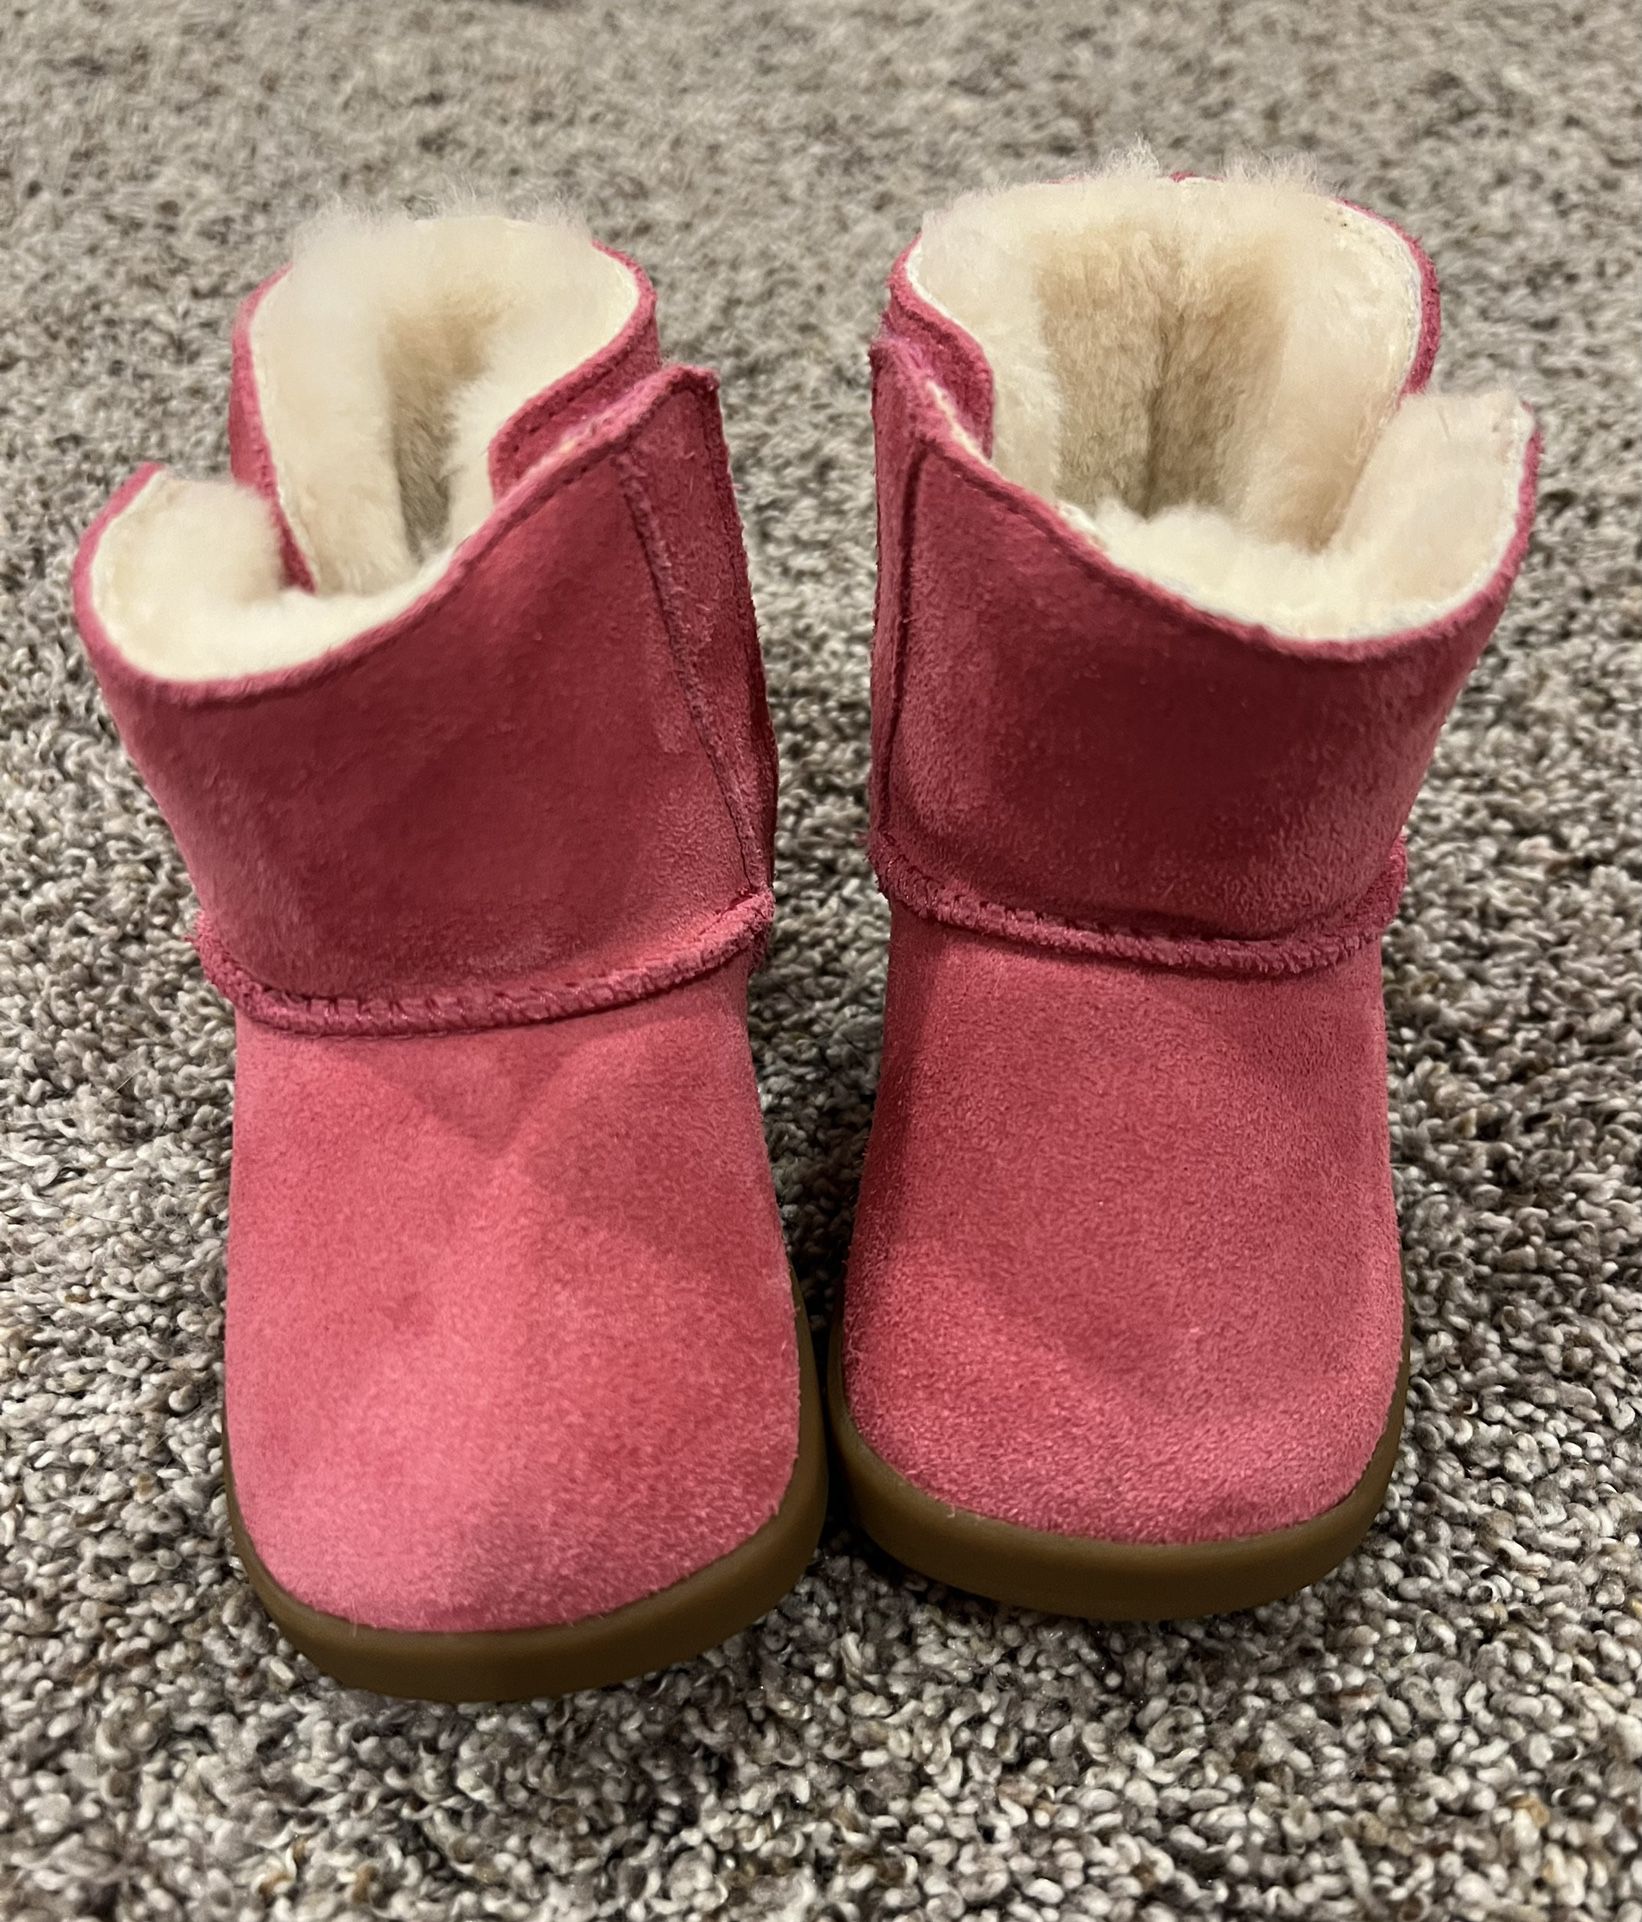 Toddler Size 4/5 Ugg Boots 